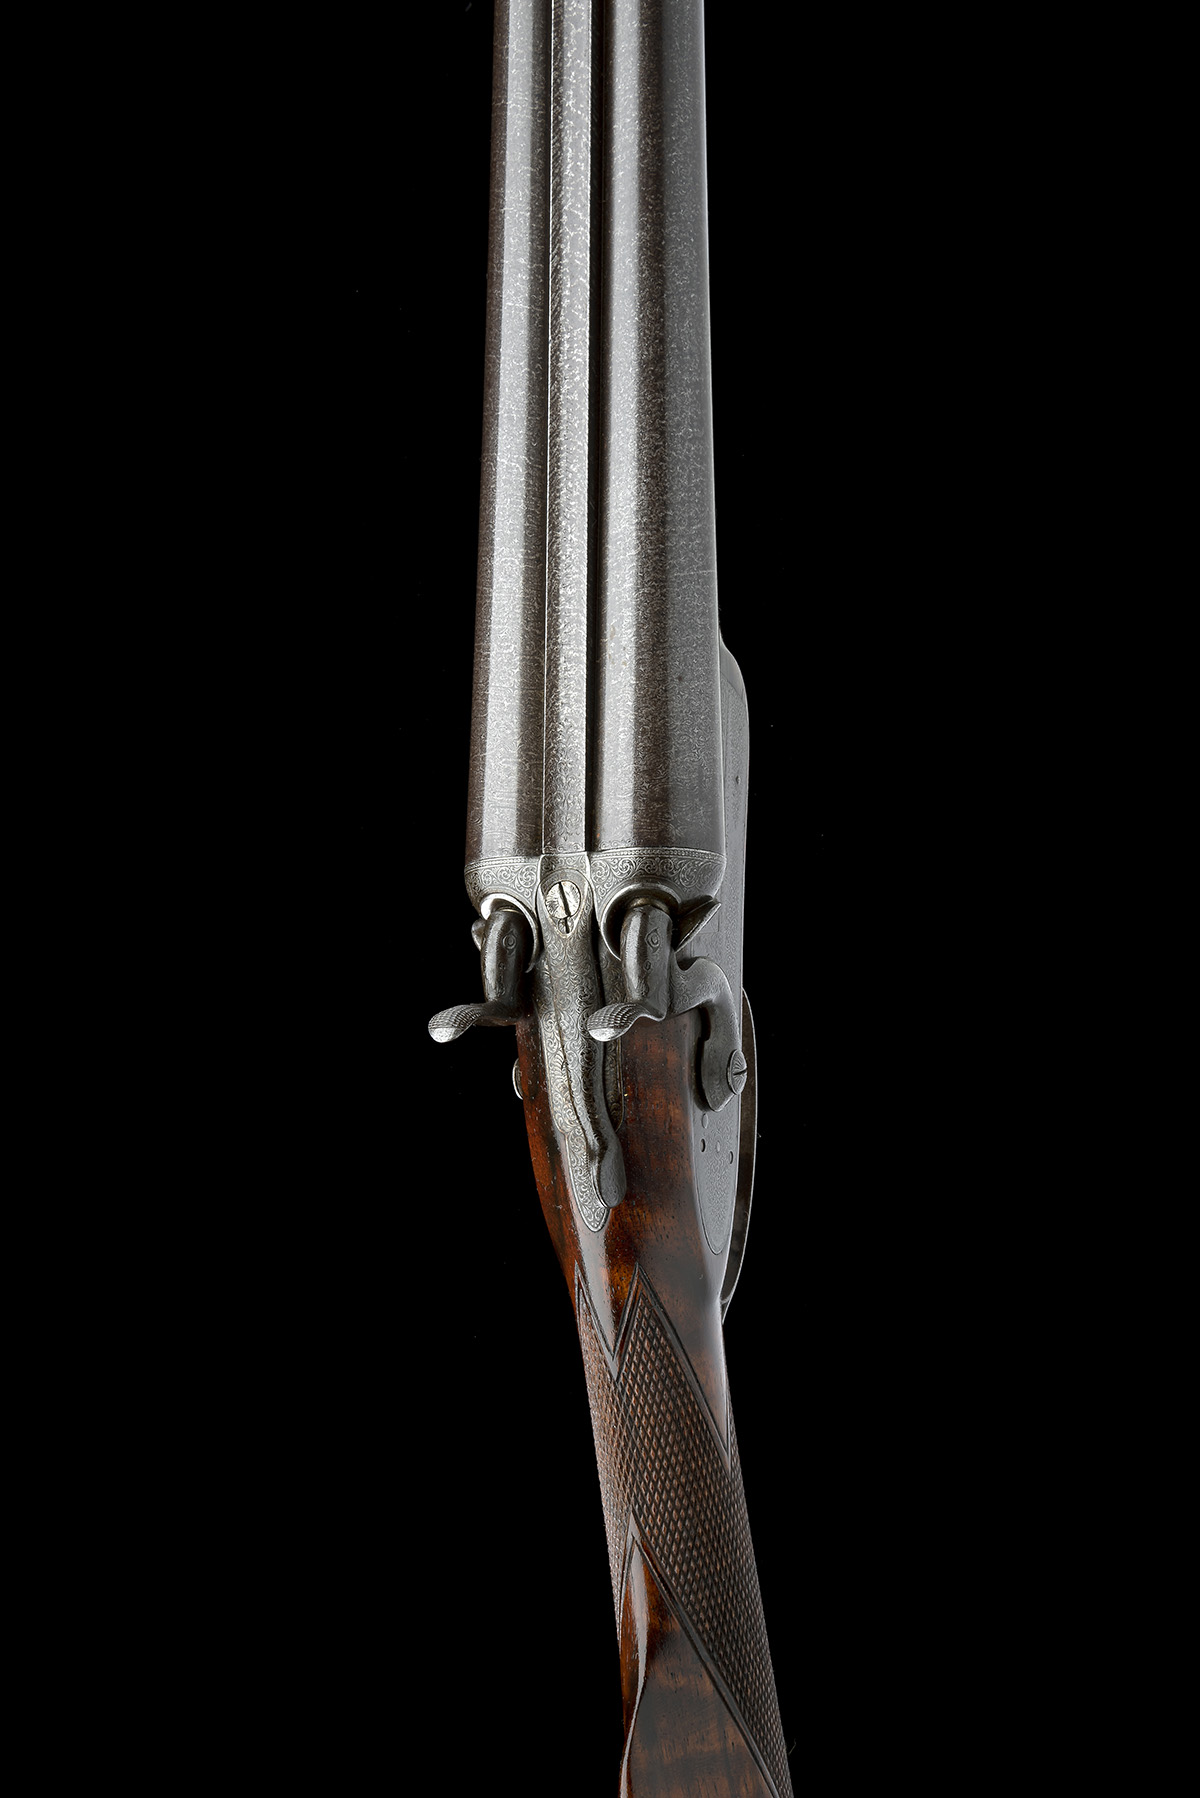 JOSEPH LANG & SONS A 12-BORE BAR-IN-WOOD TOPLEVER HAMMERGUN, serial no. 3668, for 1868, 29 3/4in. - Image 6 of 8